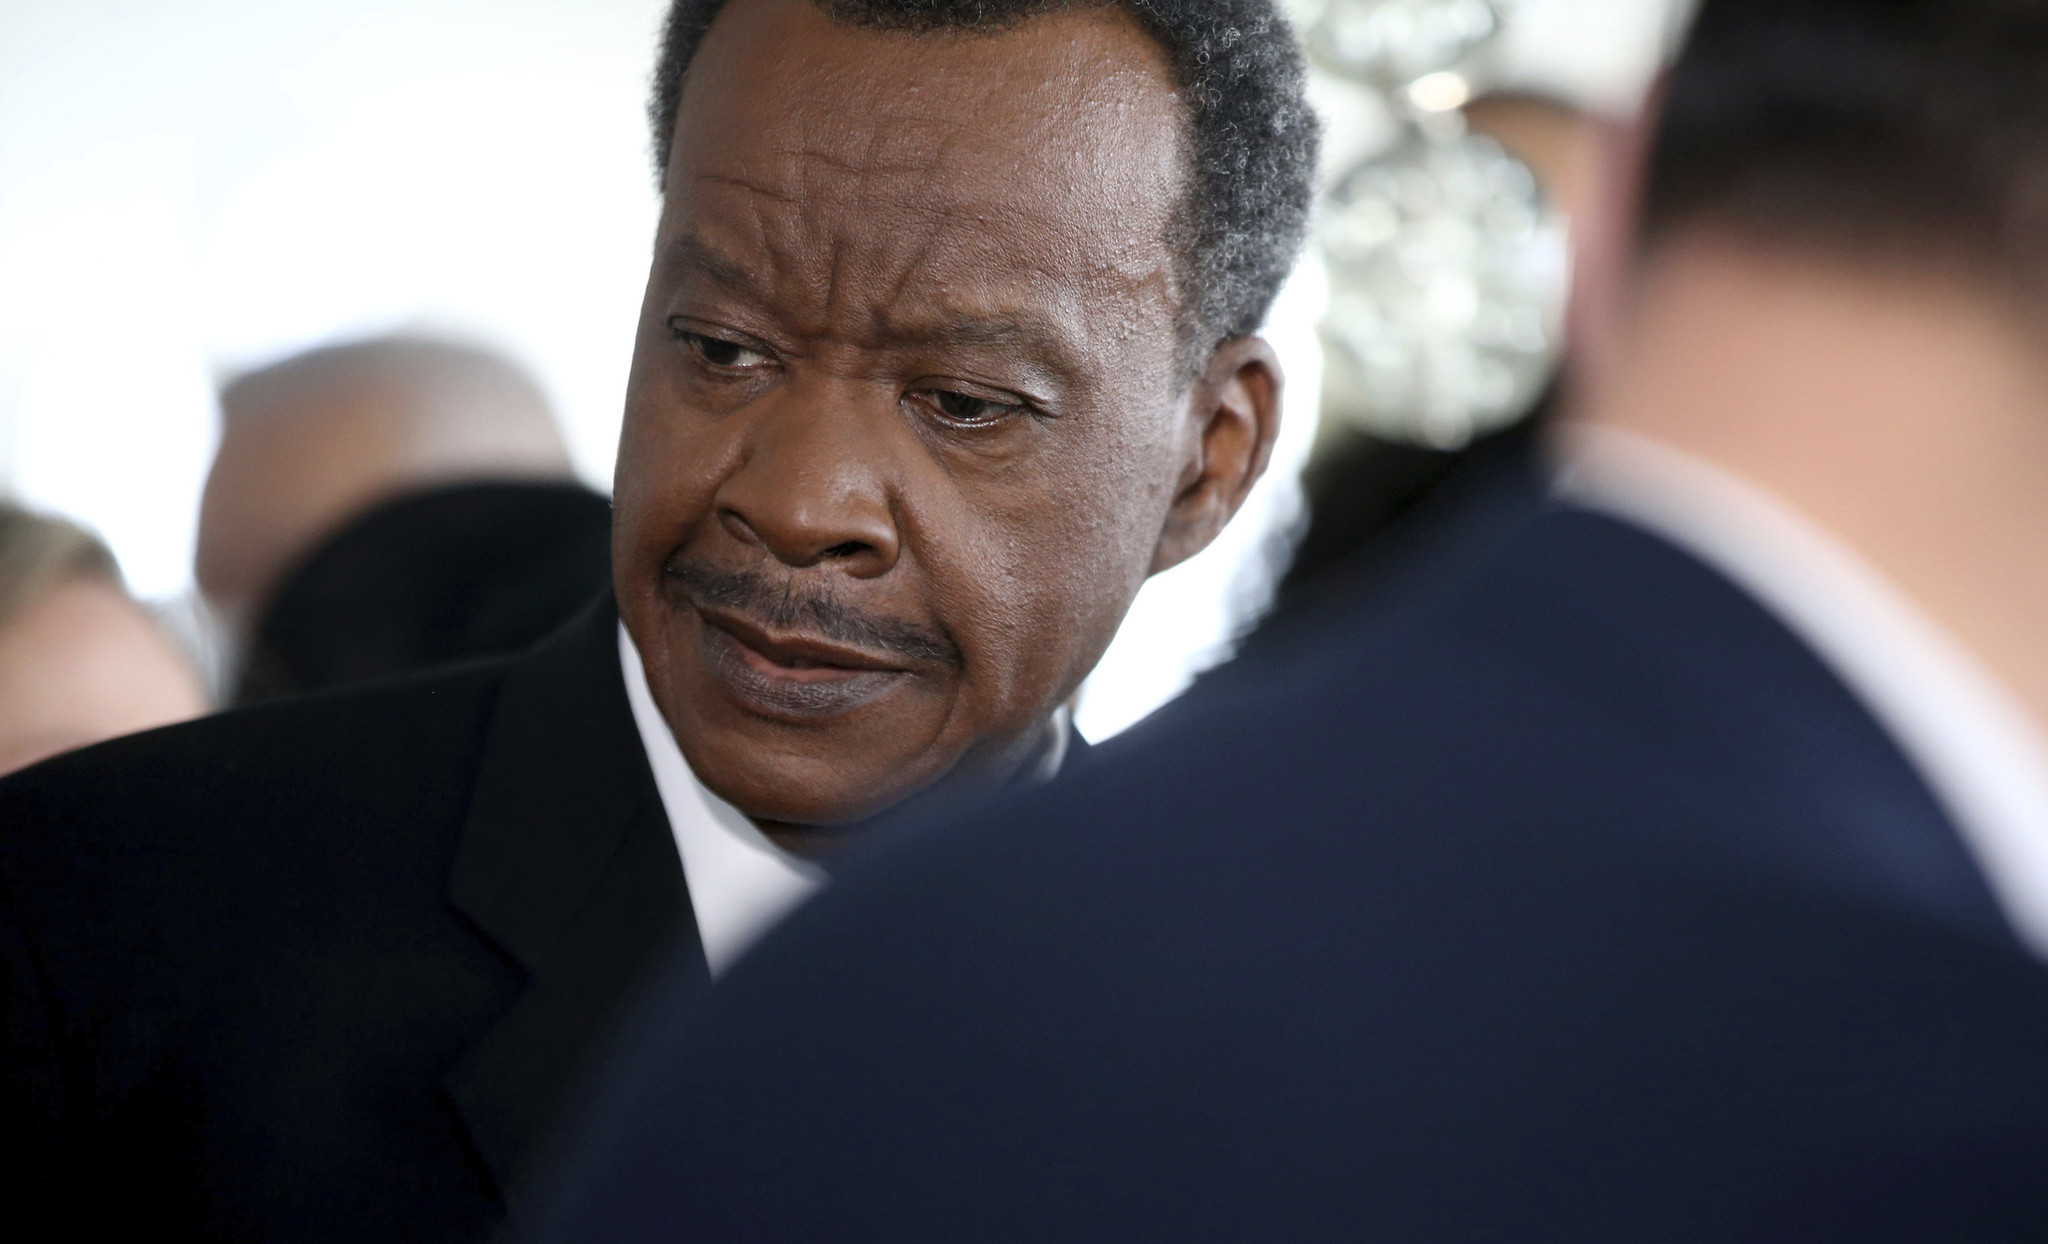 Willie Wilson confirms he's running for Chicago mayor